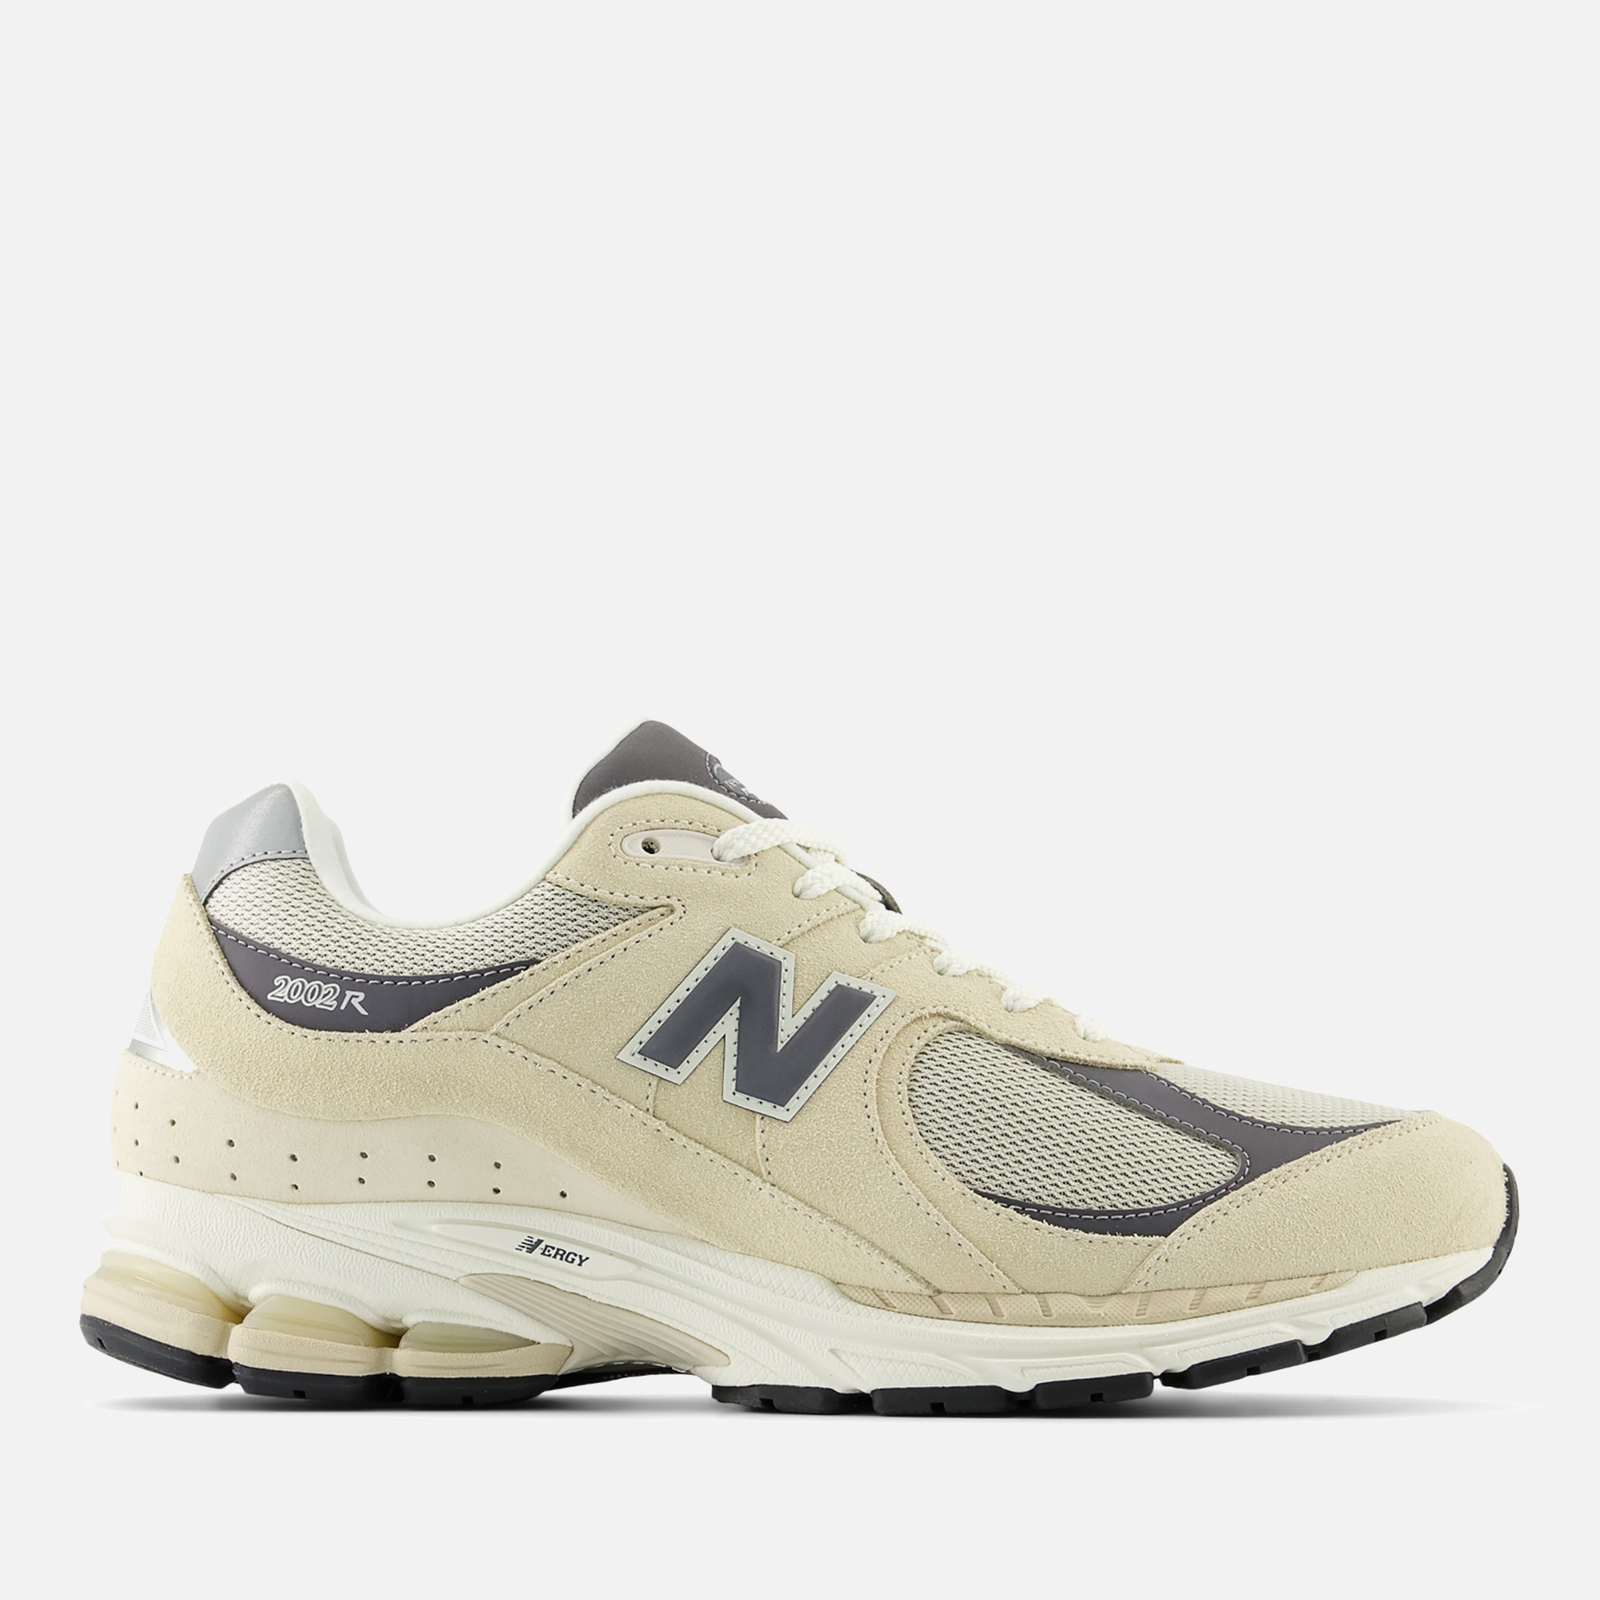 New Balance Men's 2002r Mesh and Suede Trainers